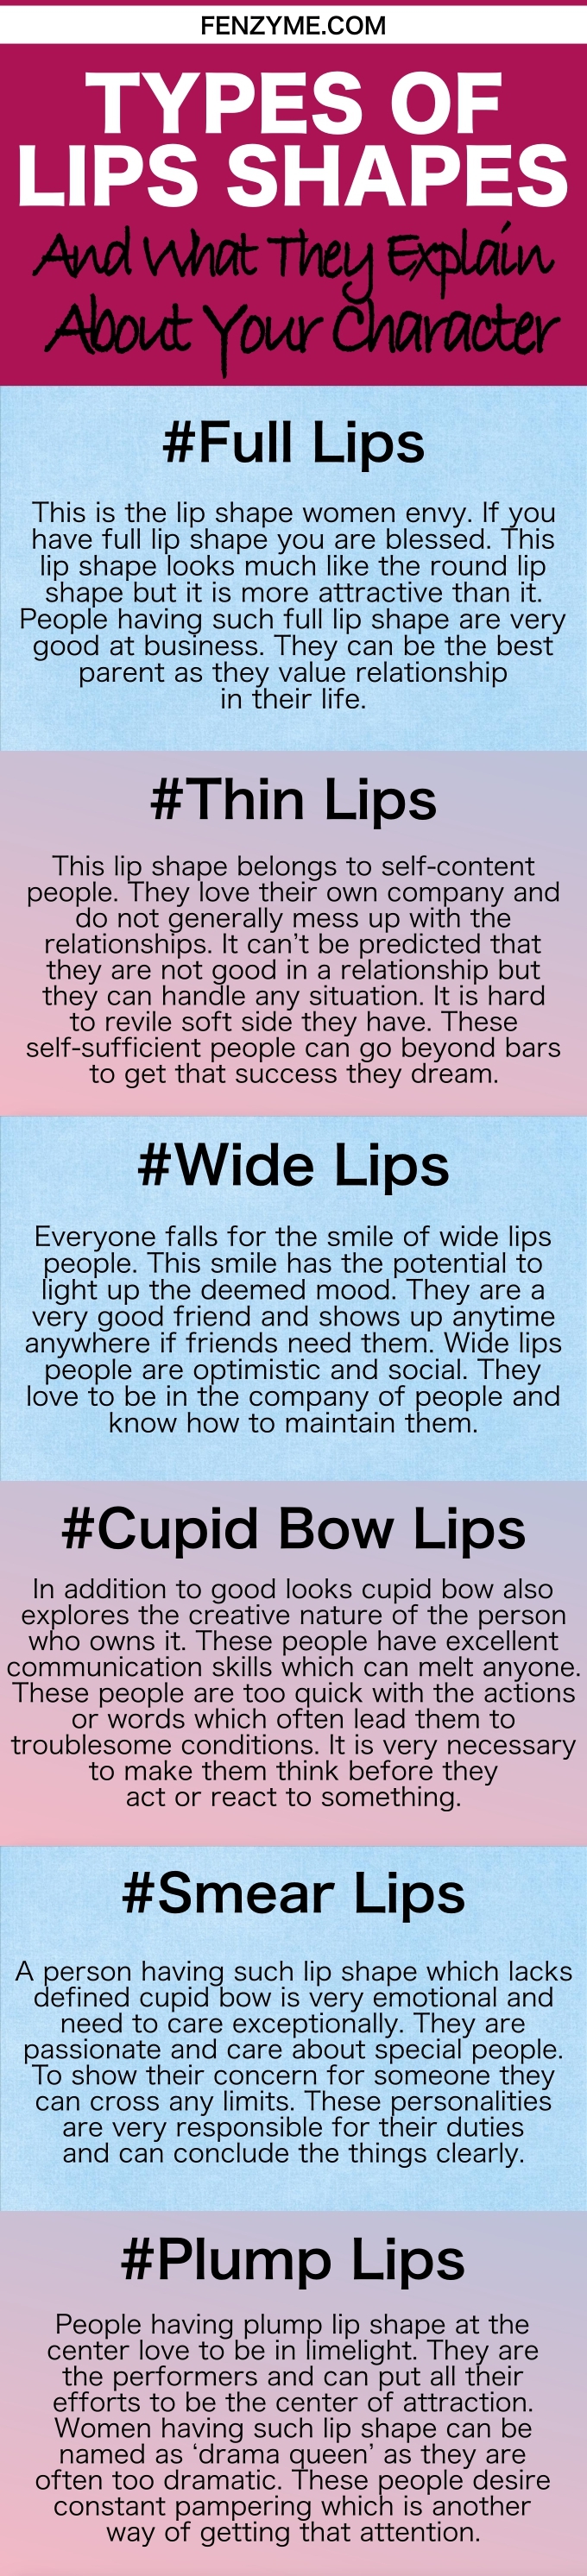 TYPES OF LIPS SHAPES AMD WHAT THEY EXPLAIN ABOUT YOUR CHARACTER